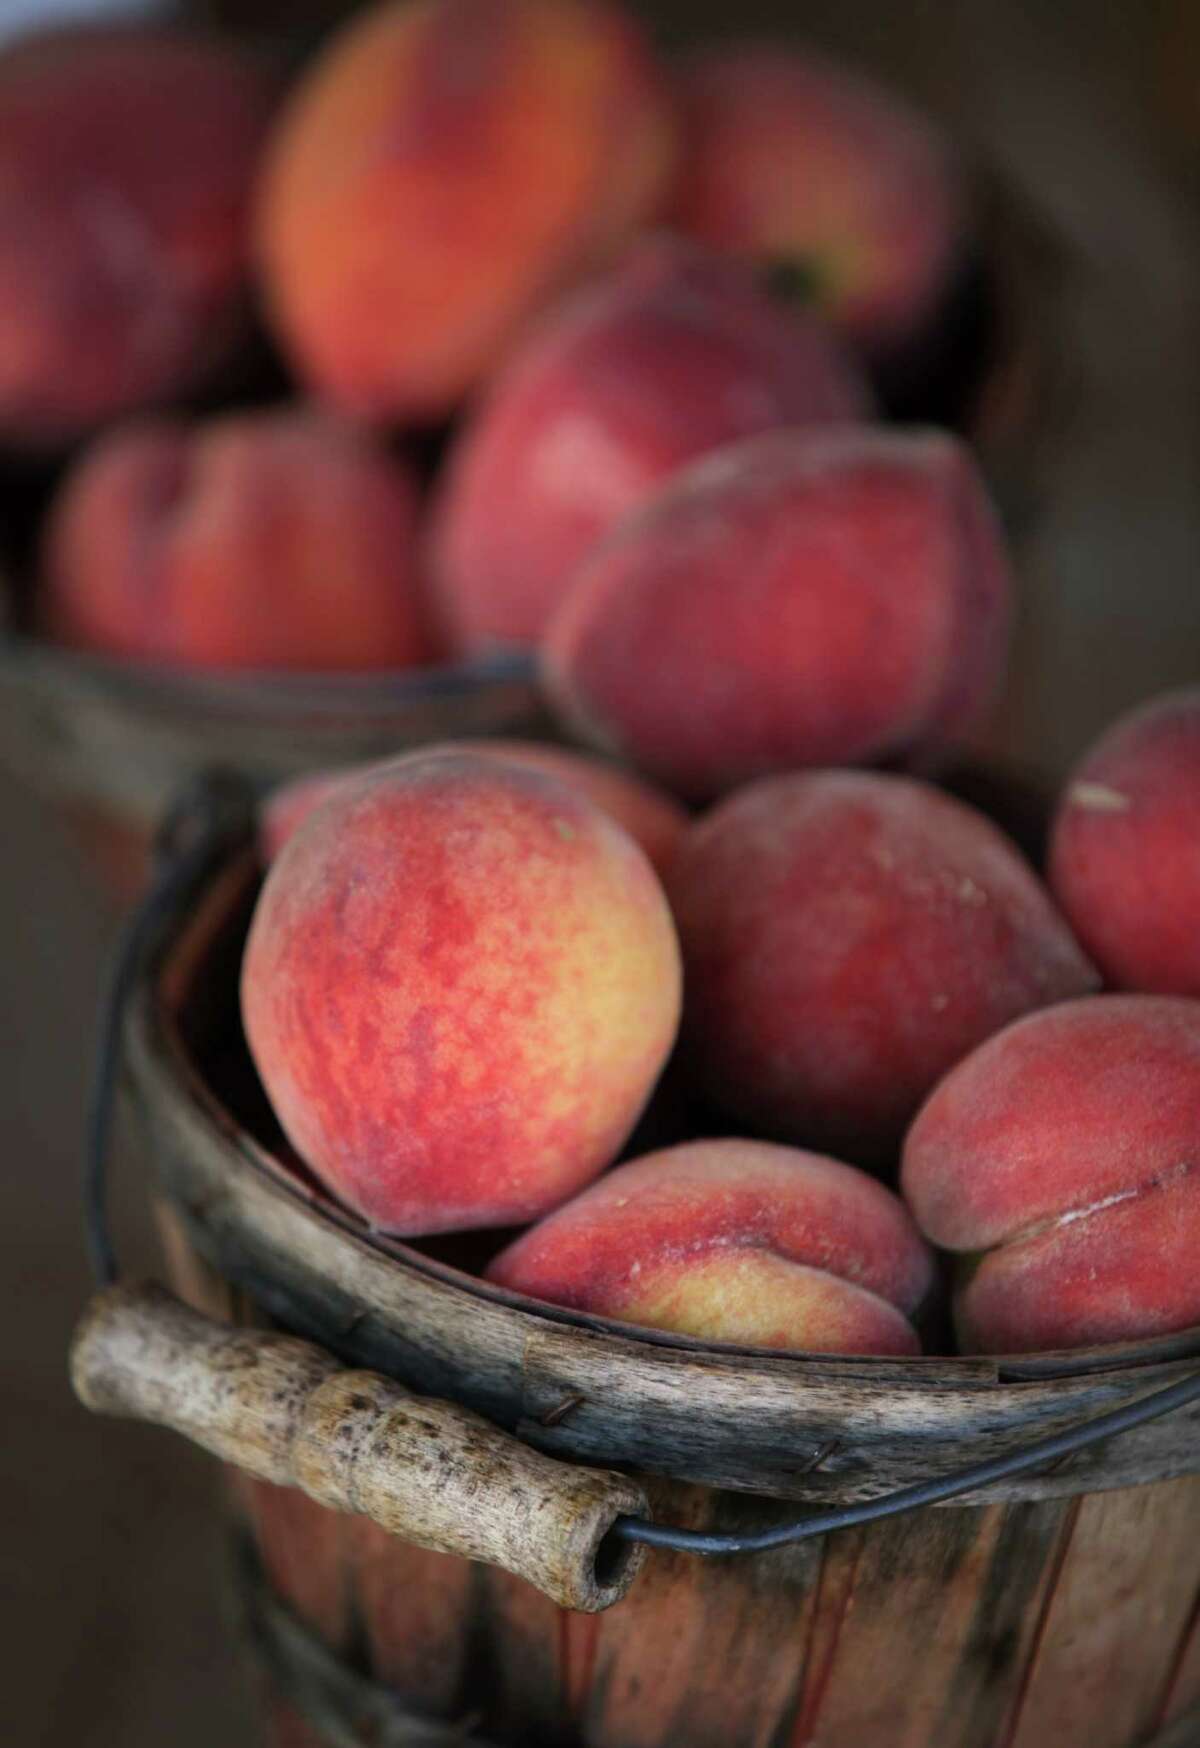 Basket of freshly picked peaches from Engel Orchards near Fredericksburg, TX. Tuesday, May 29, 2012.